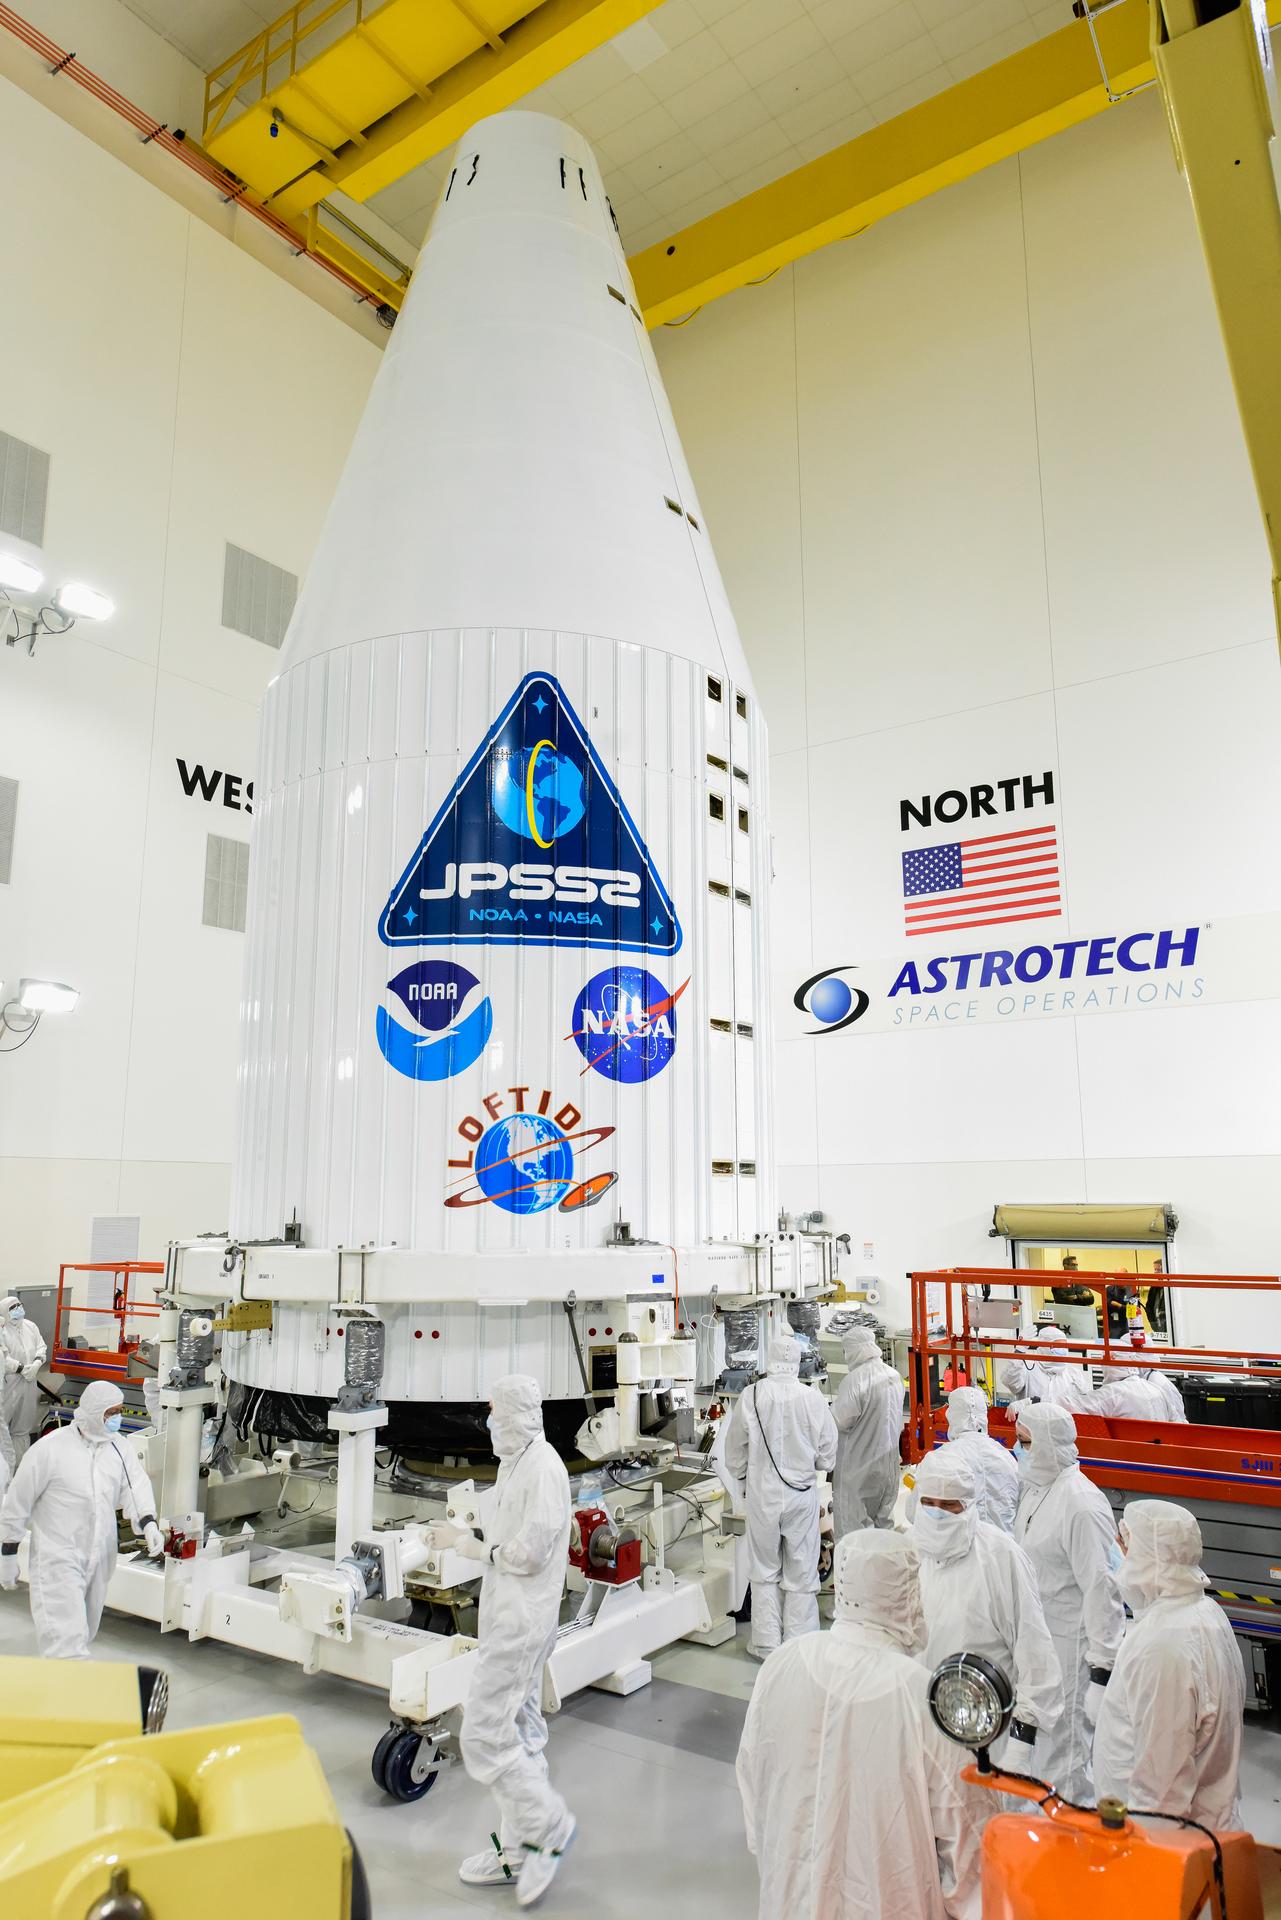 Technicians check the United Launch Alliance Atlas V payload fairing containing the National Oceanic and Atmospheric Administration's (NOAA) Joint Polar Satellite System-2 (JPSS-2) inside the Astrotech Space Operations facility at Vandenberg Space Force Base (VSFB) in California on Oct. 12, 2022.